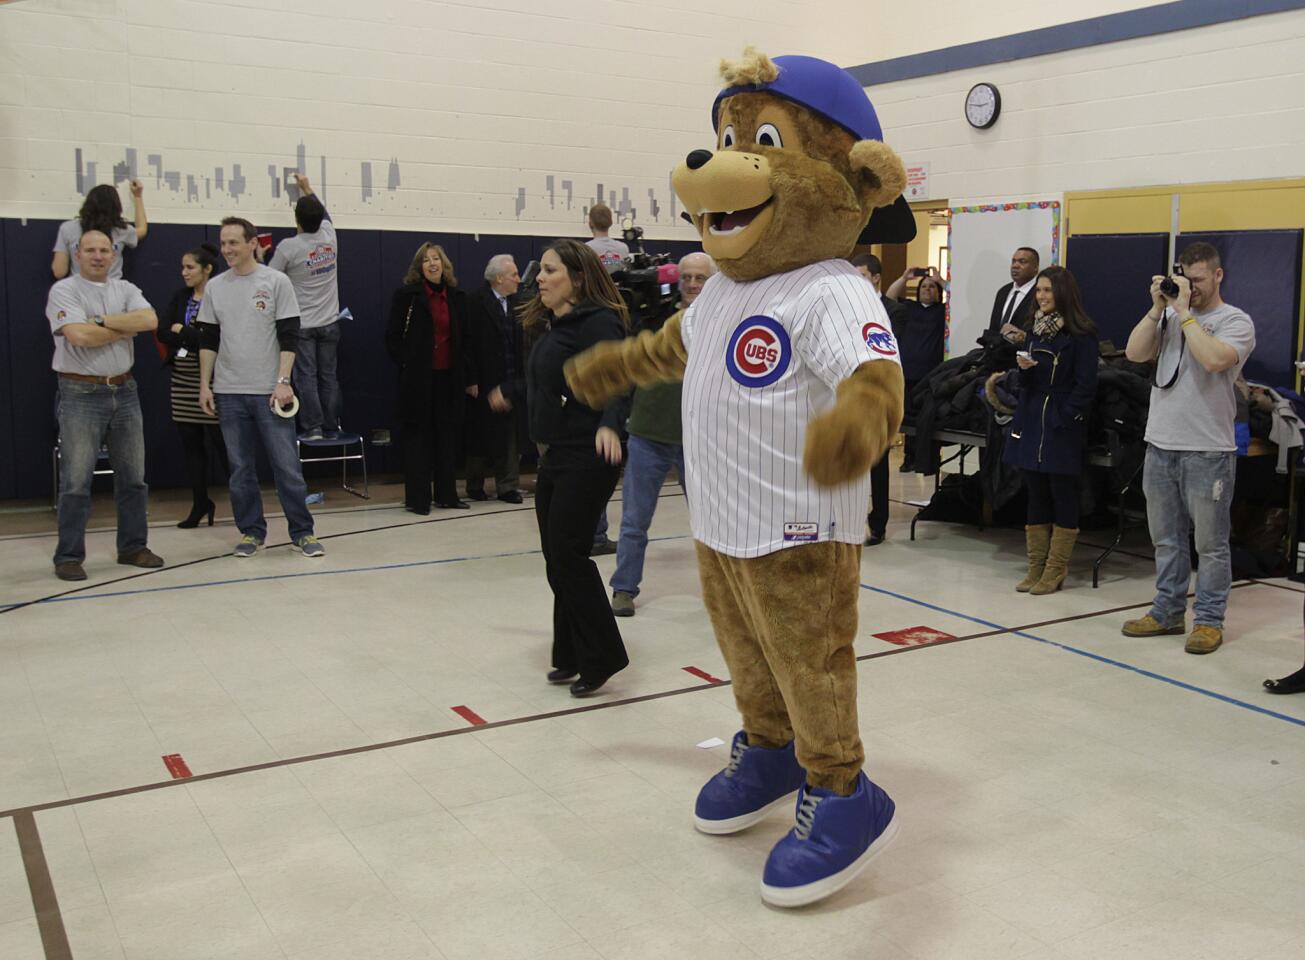 New mascot "Clark" does some jumping- jacks with the kids.